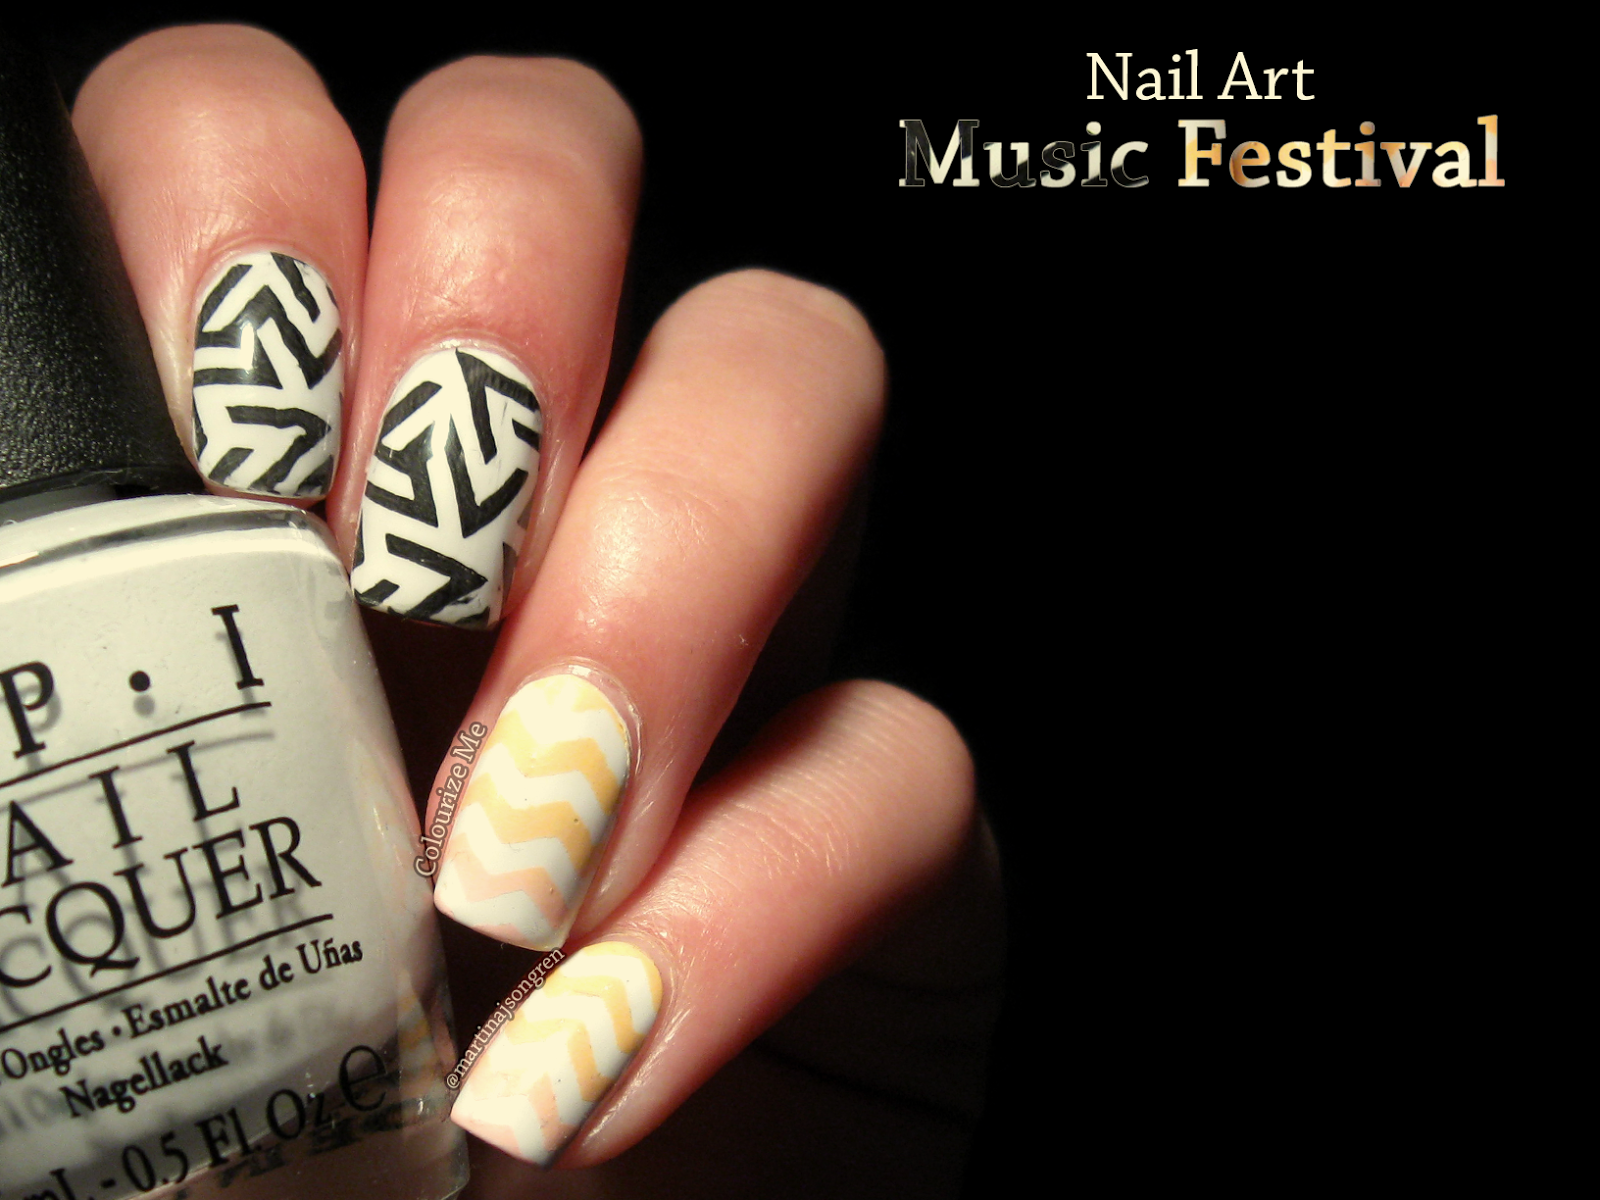 8. "Nail Art Film Festival: A Celebration of Nail Art and Film" - wide 2